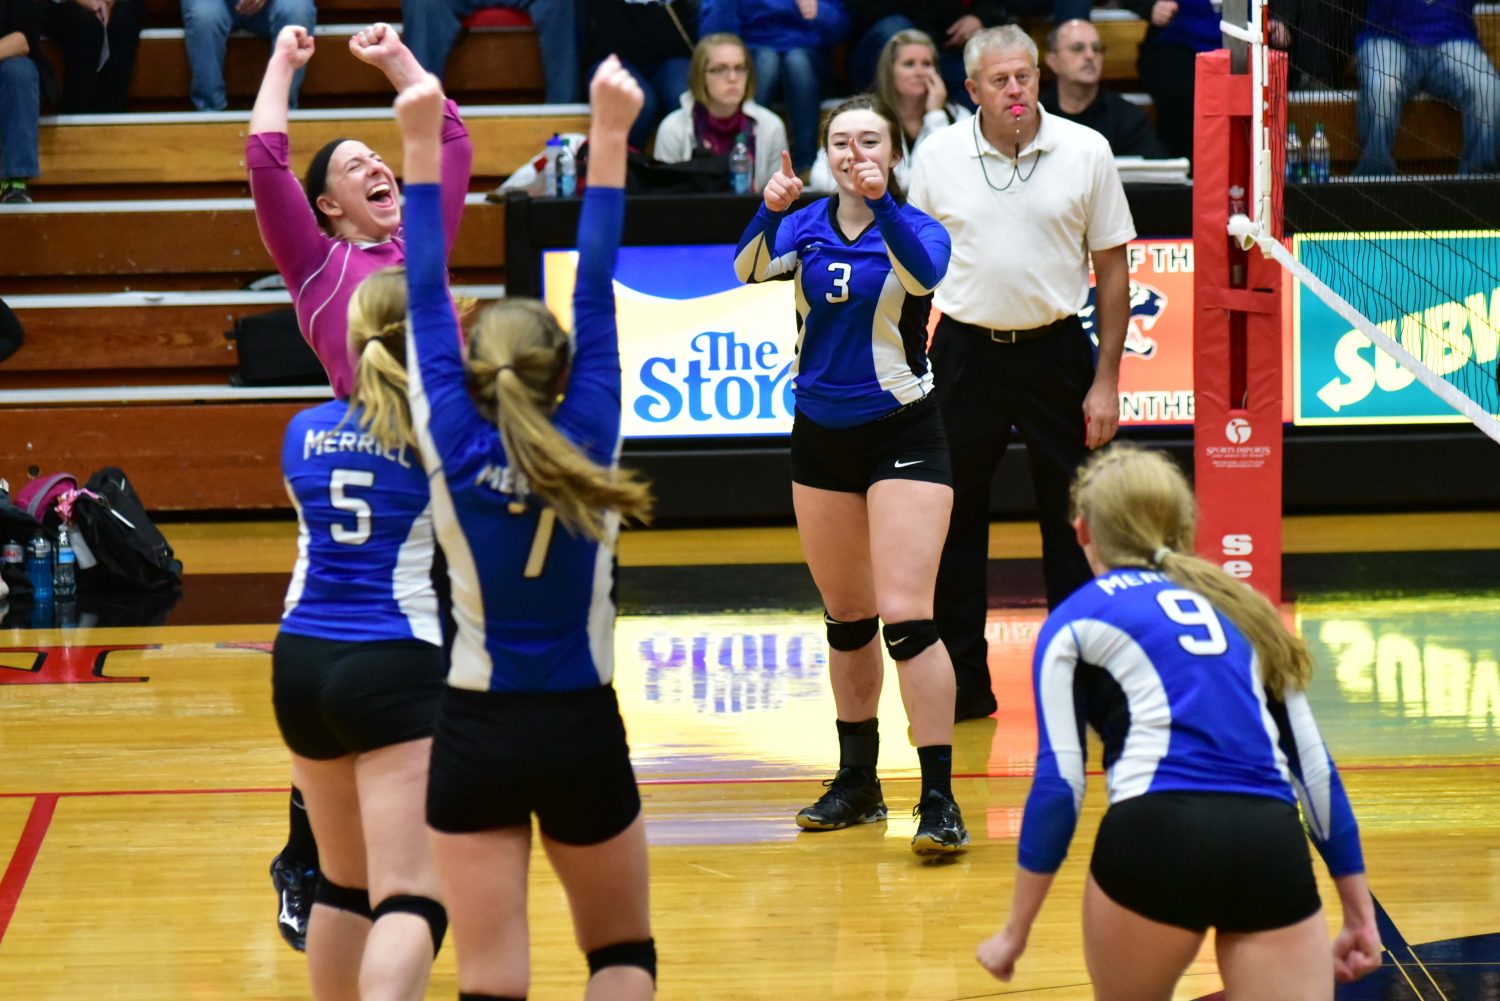 Spikers state run ‘railroaded’ by Altoona